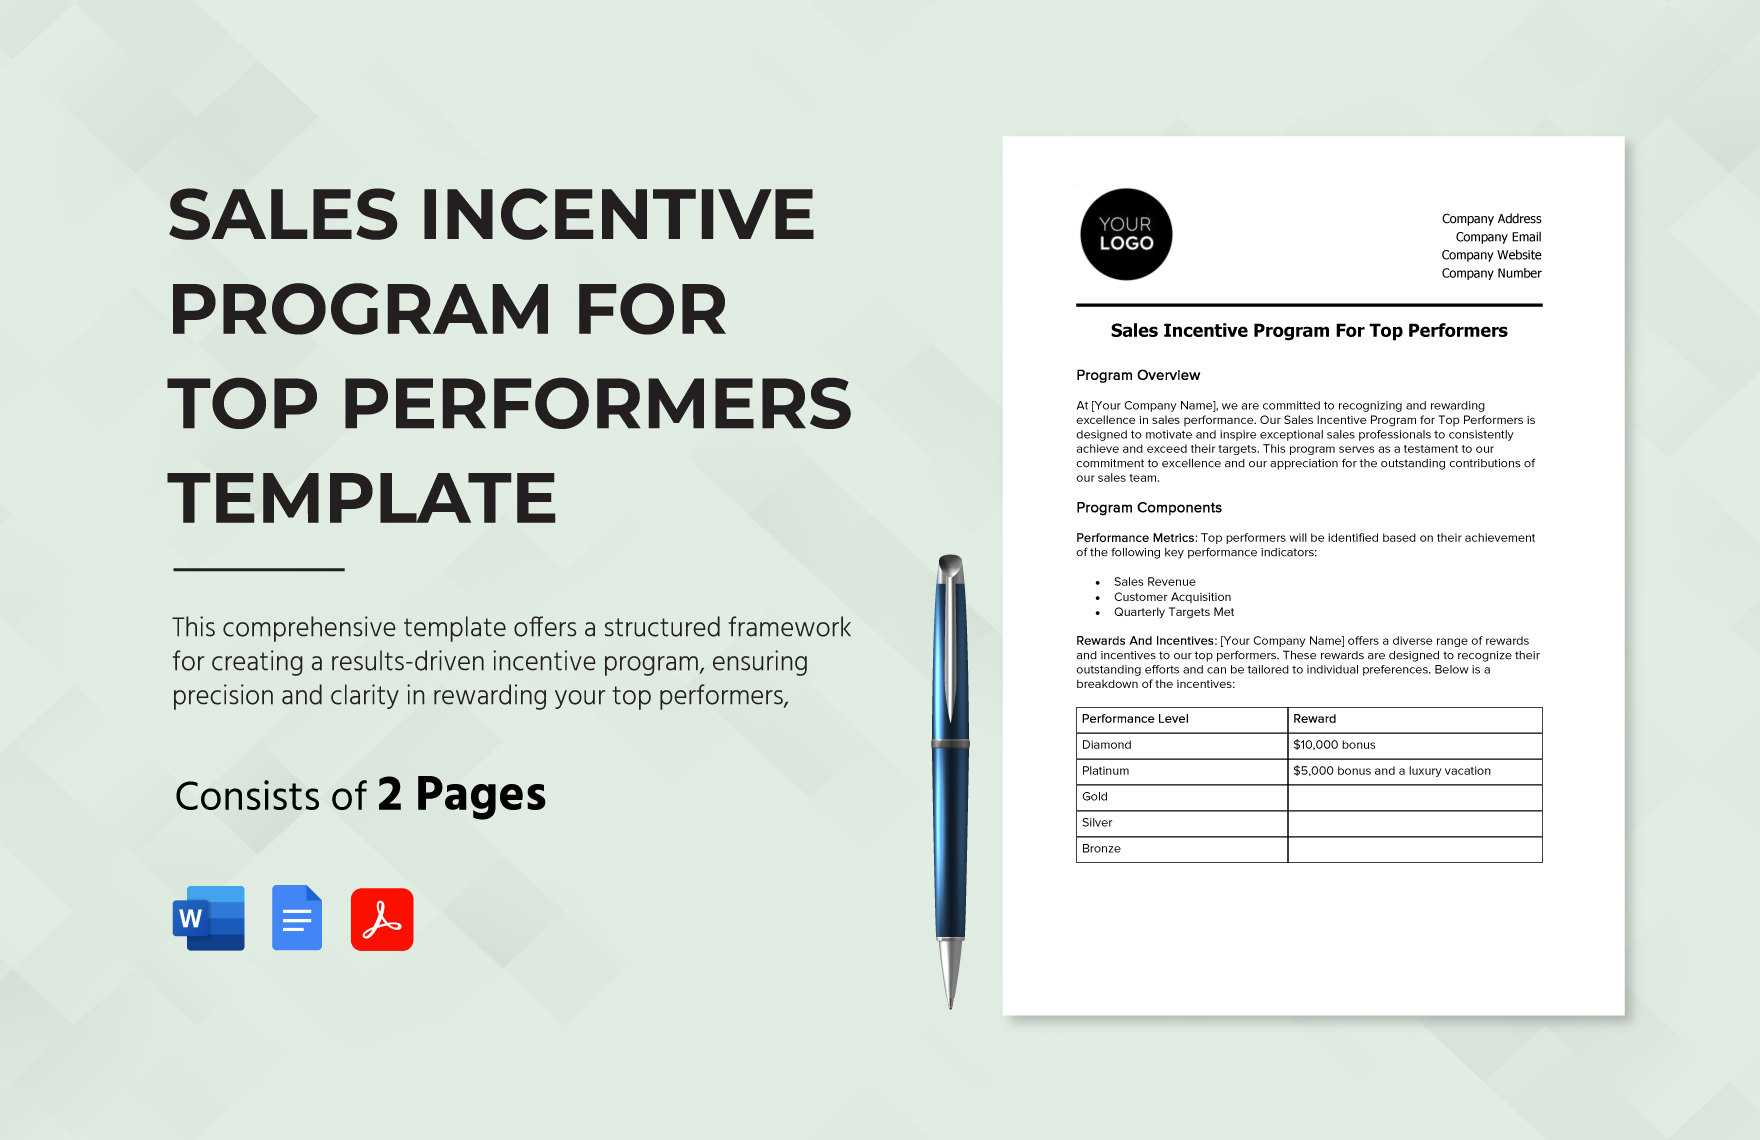 Sales Incentive Program for Top Performers Template